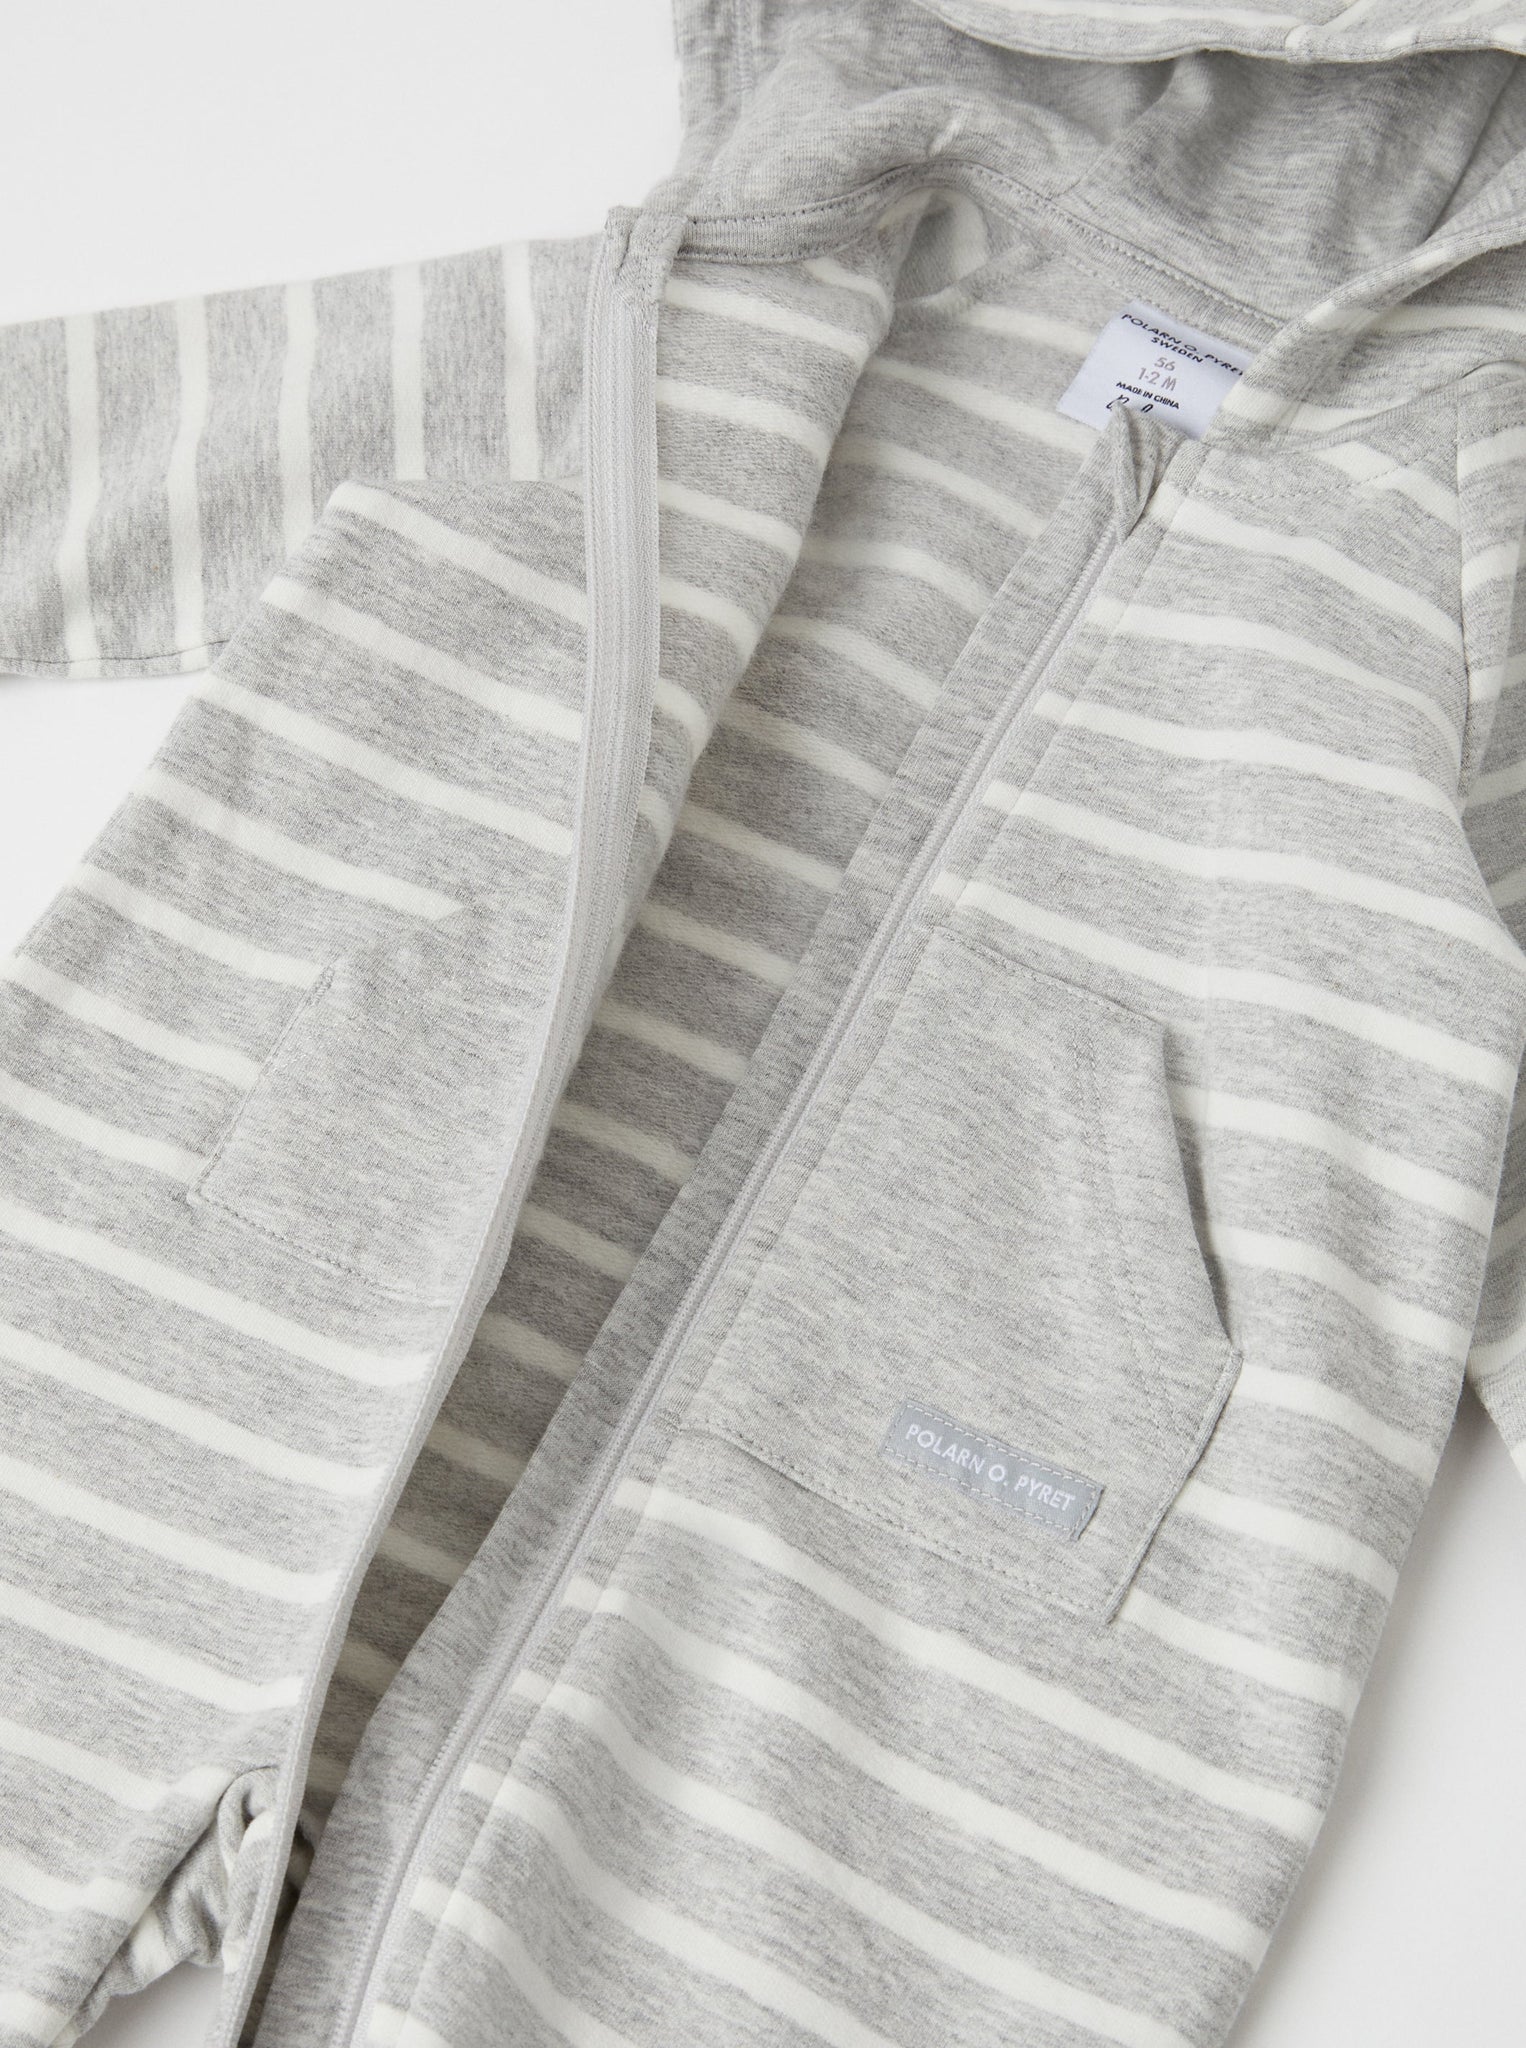 Organic Cotton Grey Baby All-In-One from the Polarn O. Pyret babywear collection. Ethically produced kids clothing.